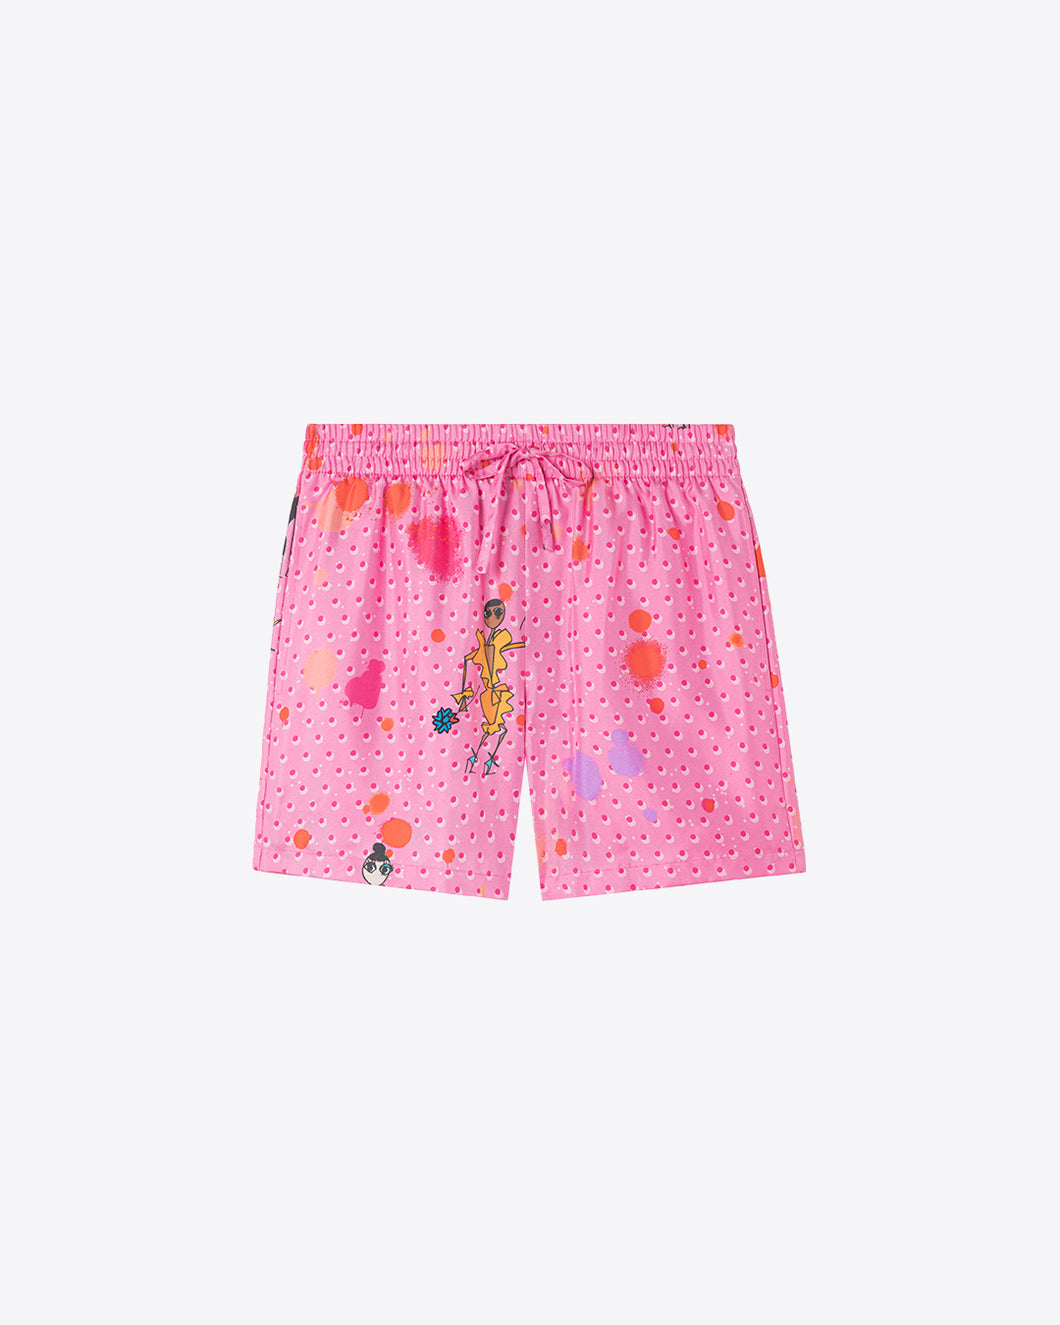 SILK-TWILL SHORTS - SPOTTED PINK